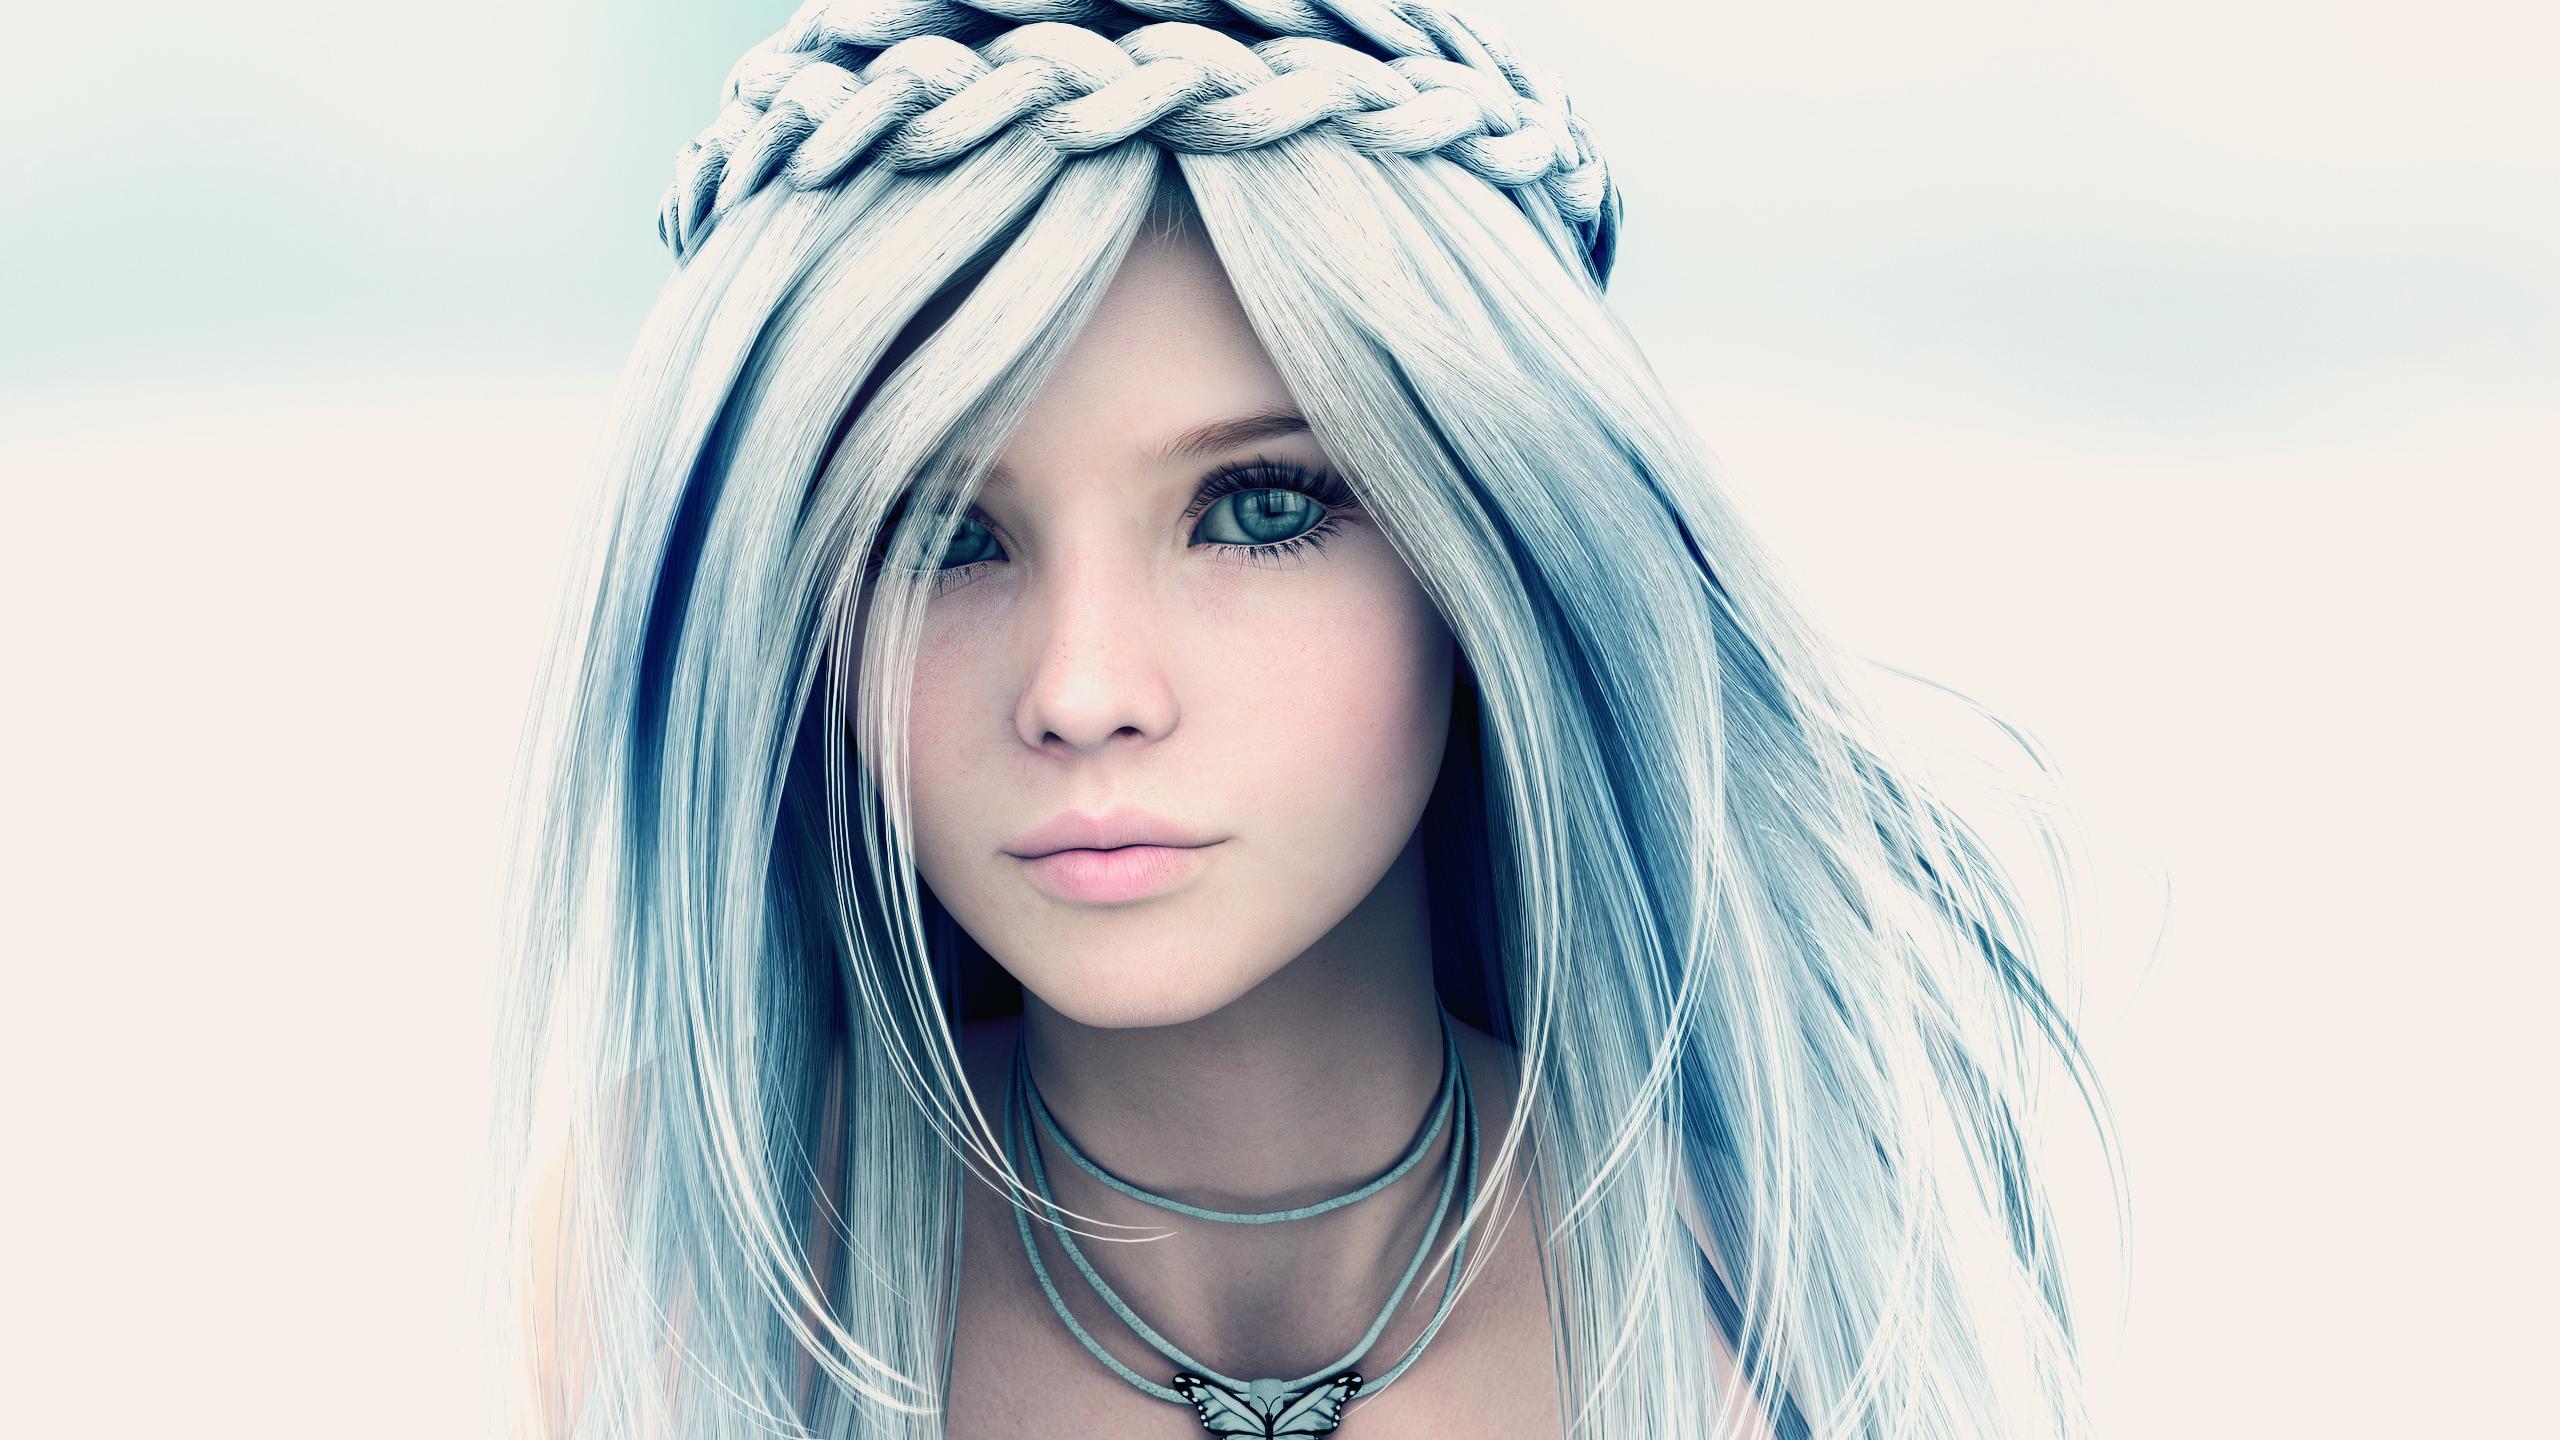 Anime Girl with White Hair and Blue Eyes - wide 10